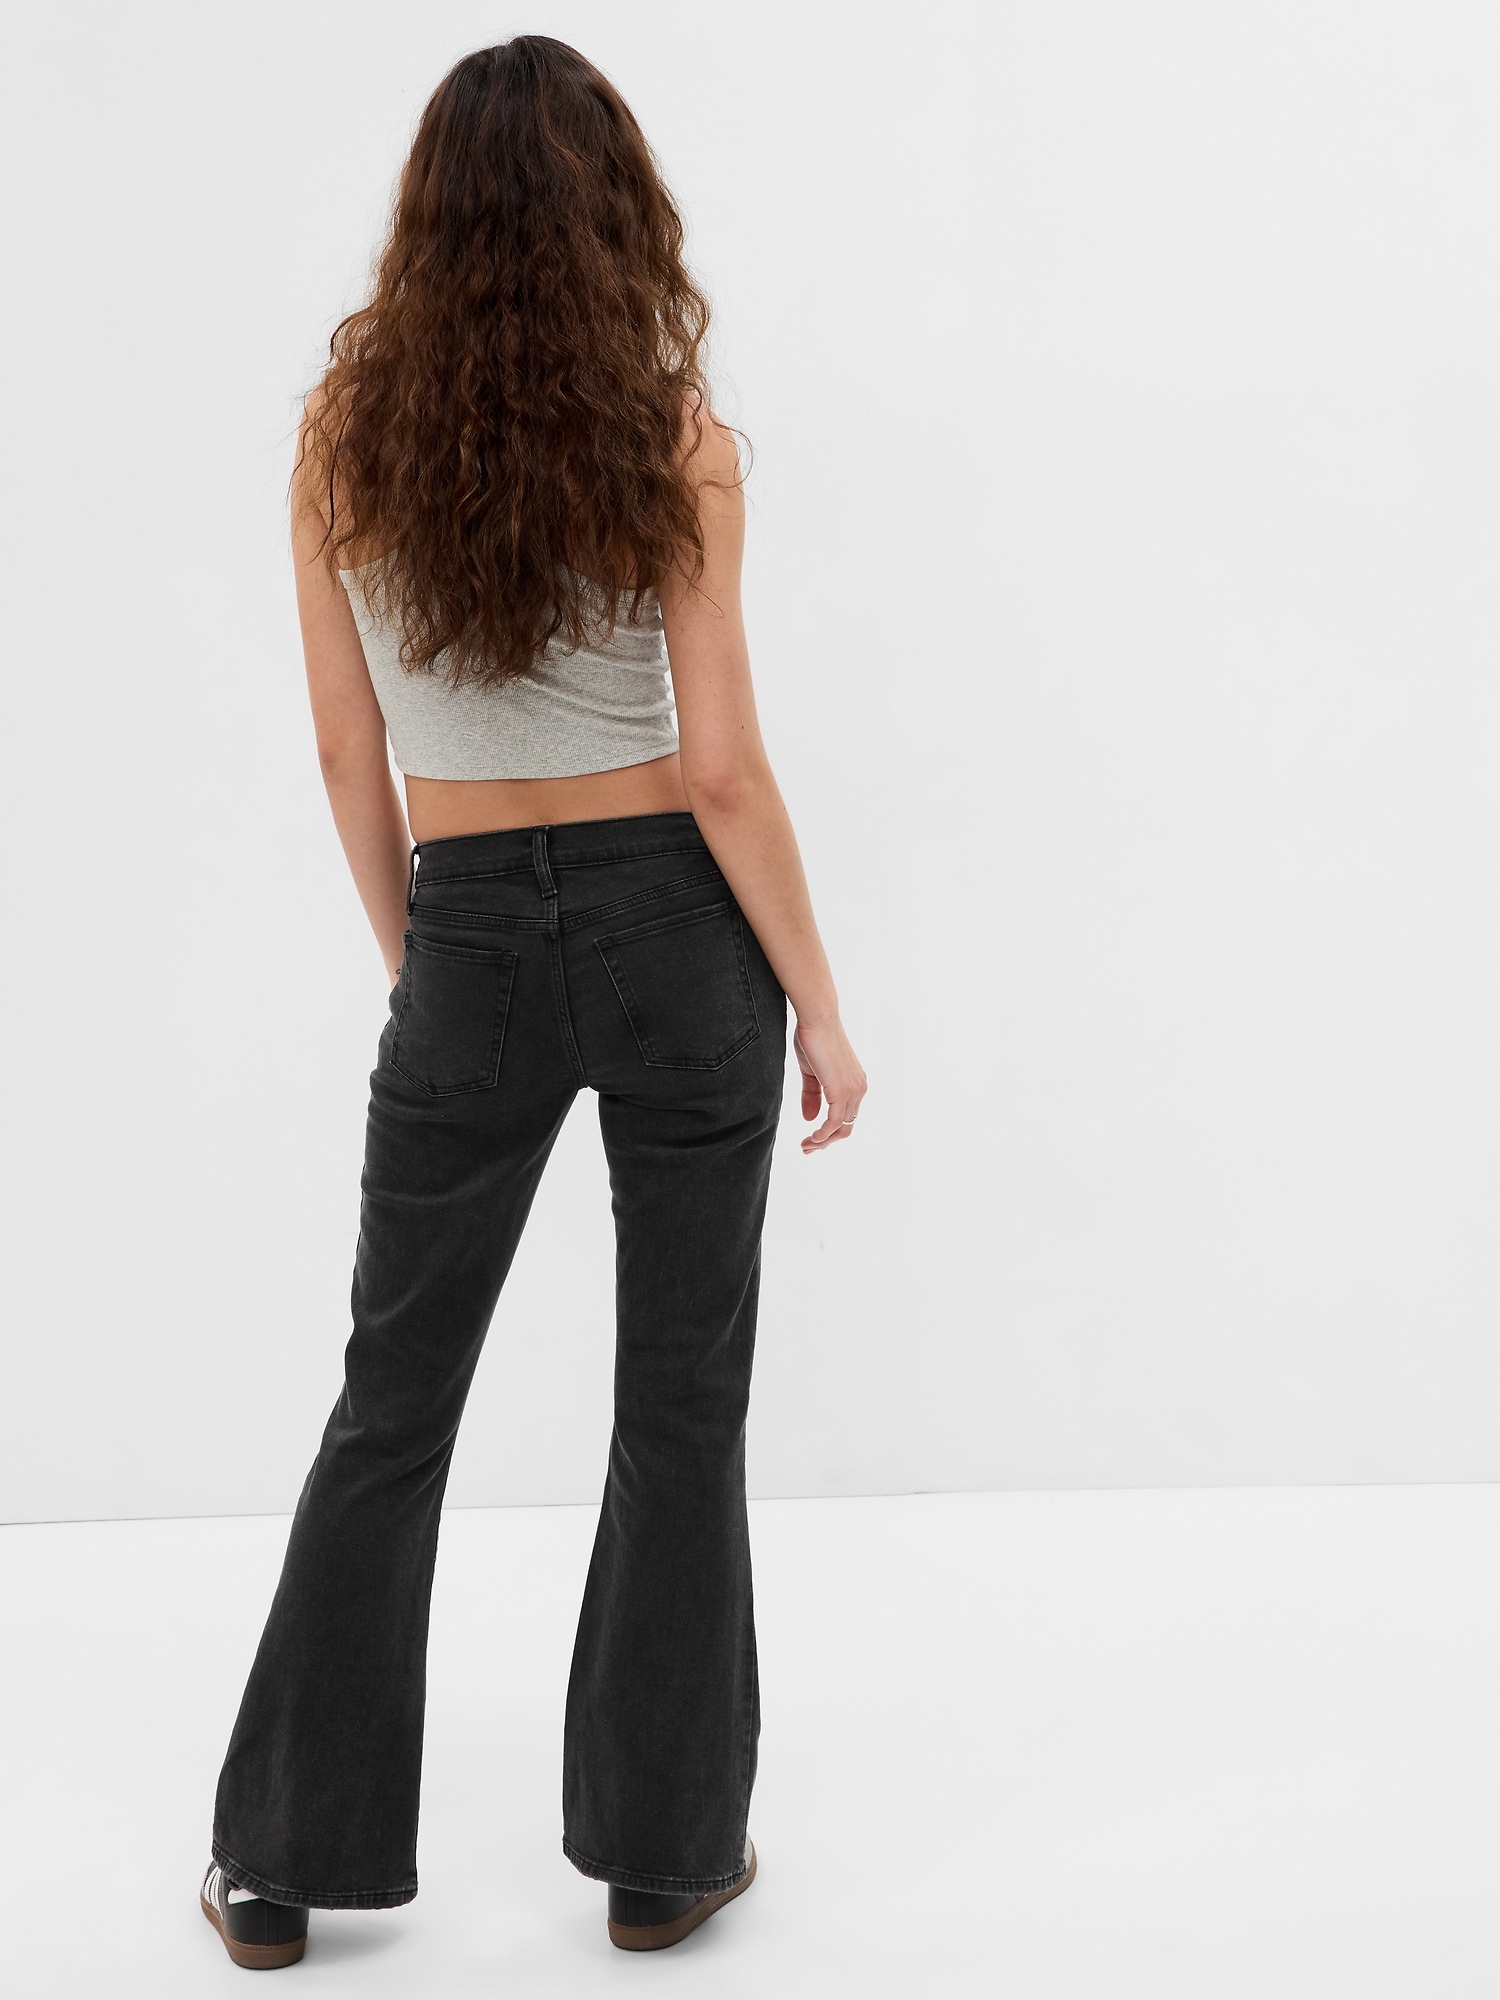 Y2K Low Rise Flare Trousers / Size 2 / Cabi Black Flare Pants / Low Rise  Flare Business Slacks / Small / Cabi Black Trousers / Y2K Fashion 